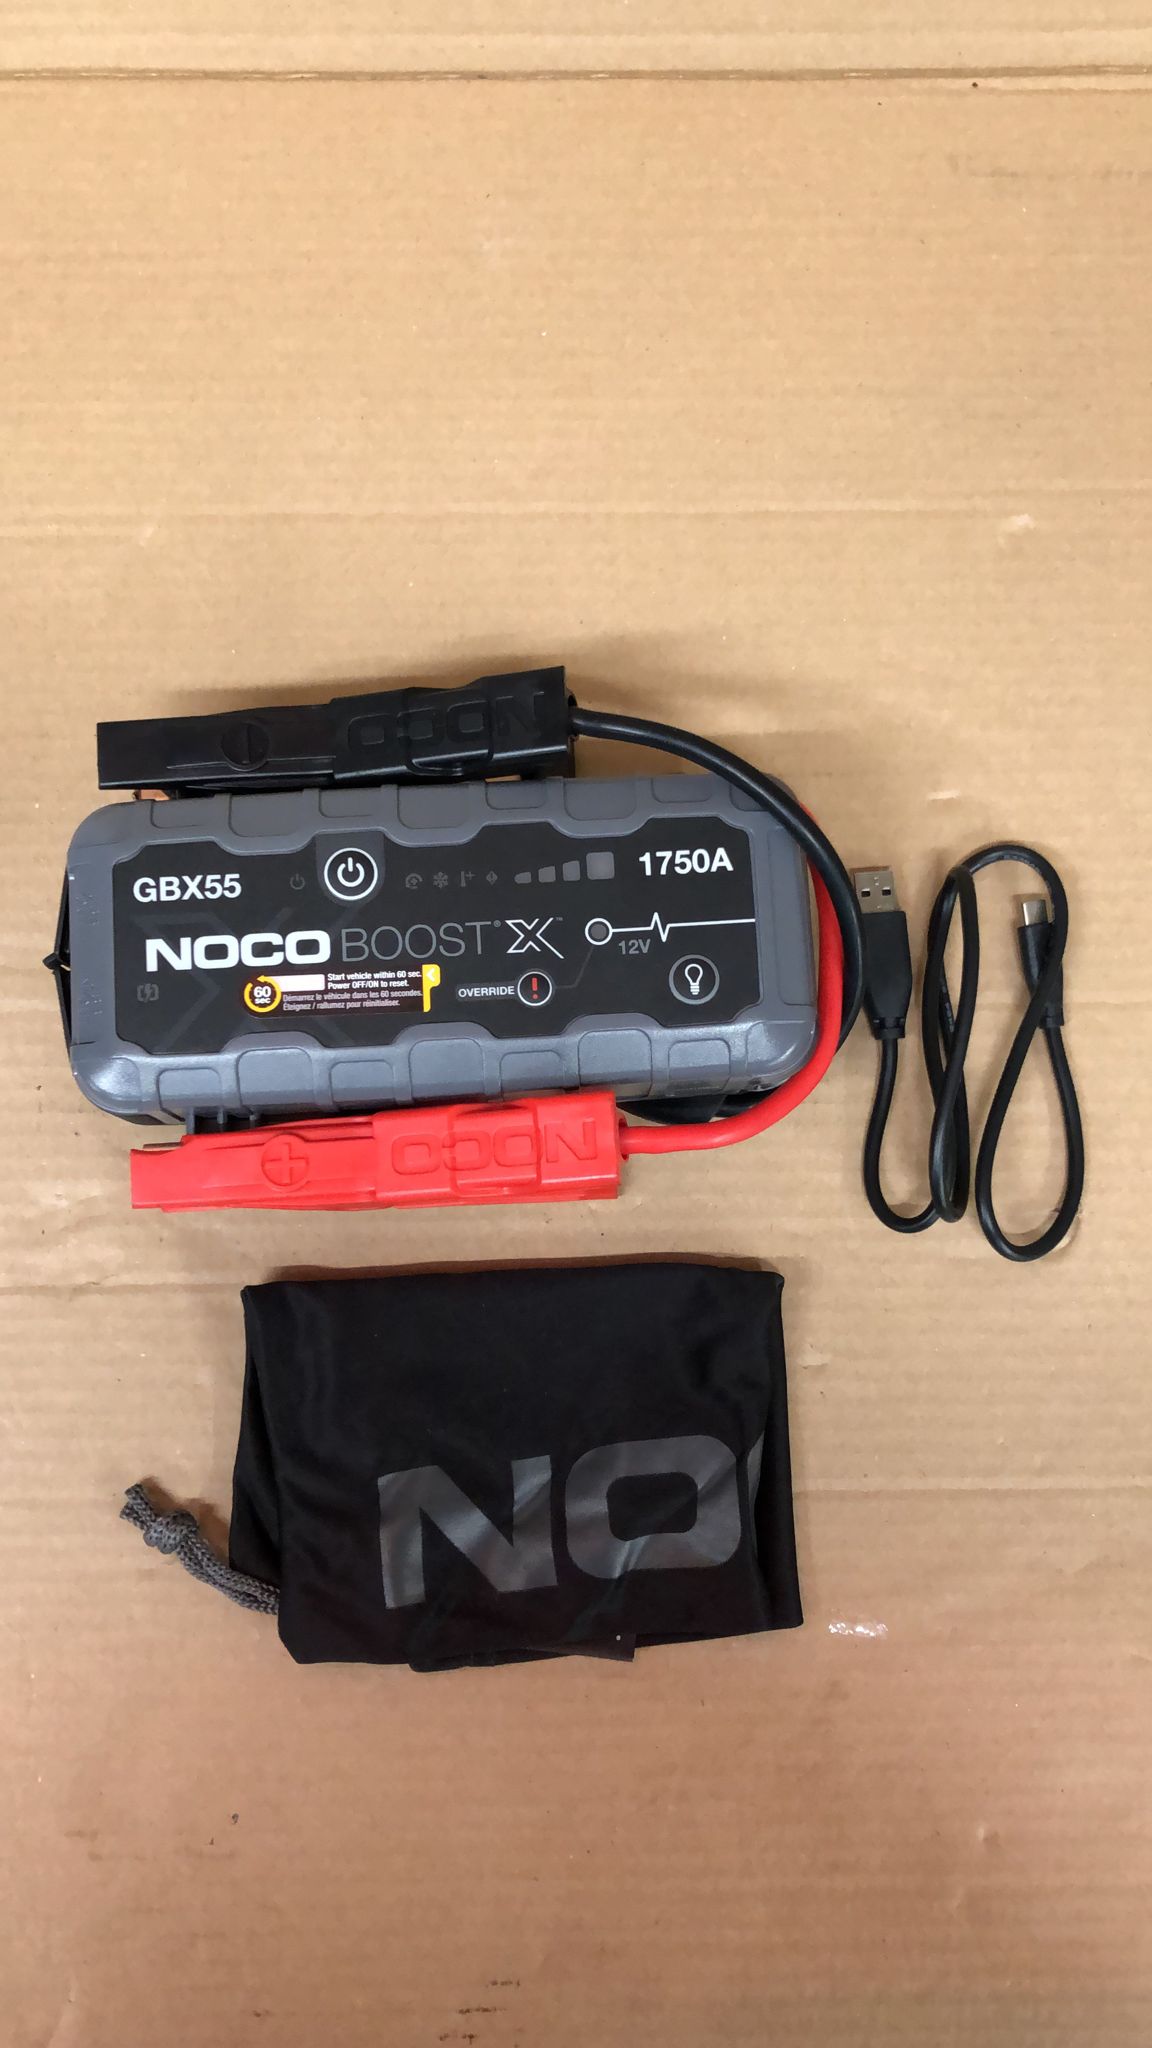 NOCO Boost X GBX55 12V UltraSafe Portable Lithium Car Jump Starter, Heavy-Duty Battery Booster Power Pack, Powerbank Charger and Jump Leads, Gray, 7.5L Petrol and 5.0L Diesel Engines , 1750A 2100